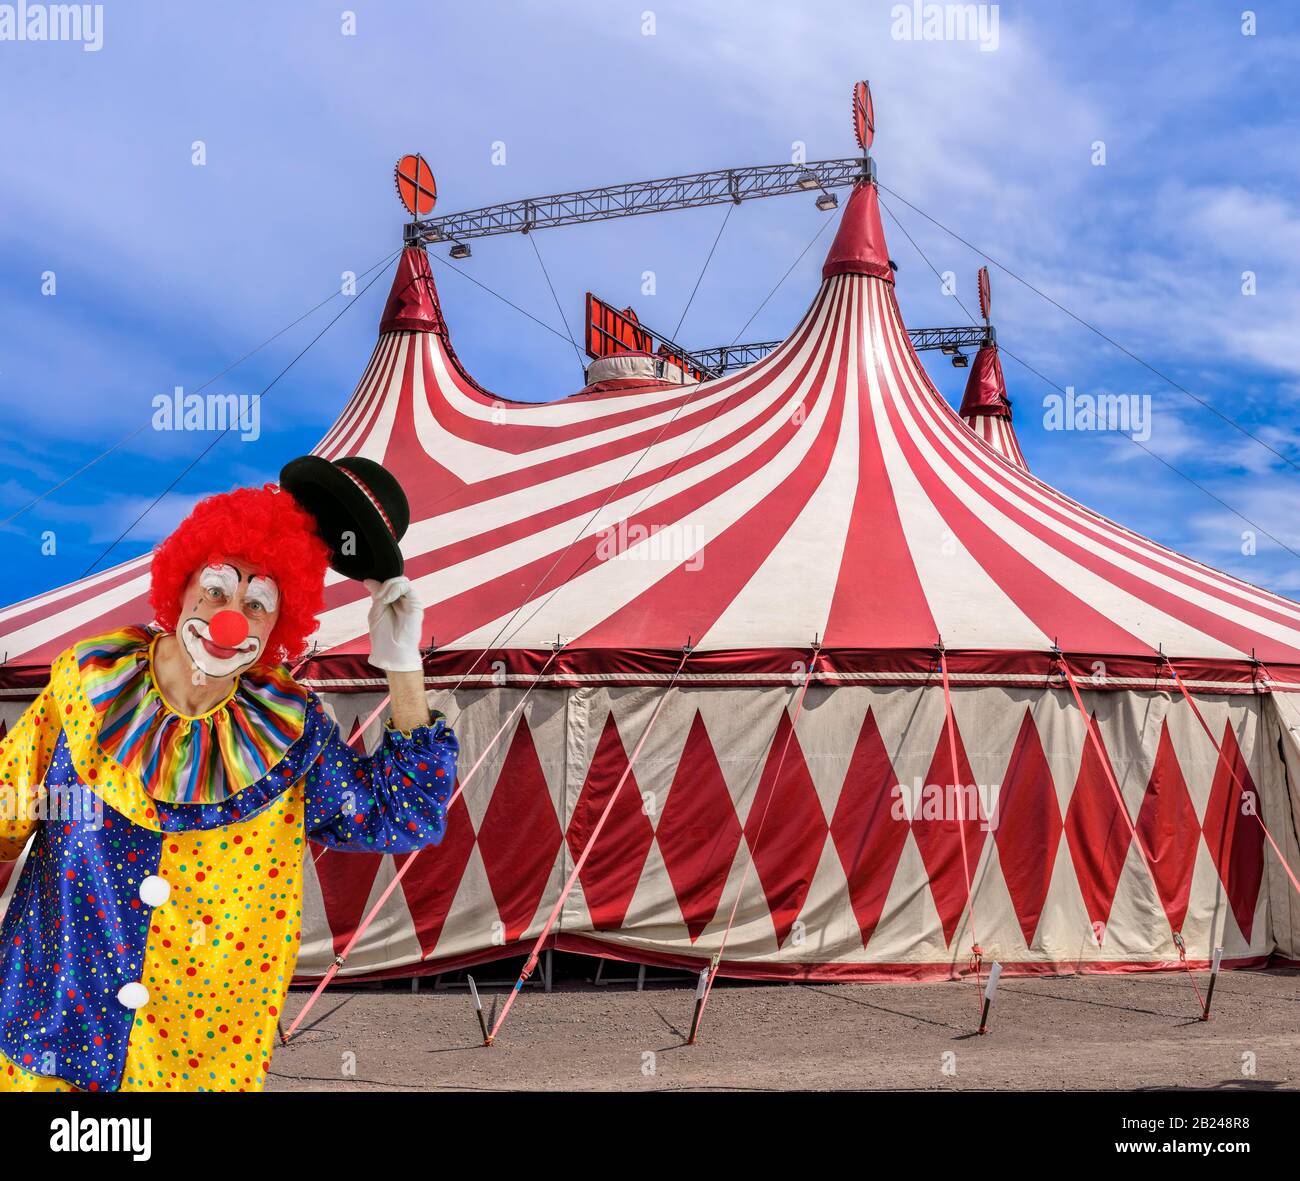 FOTOMONTAGE, Clown greets with hat in front of circus tent, Germany Stock Photo